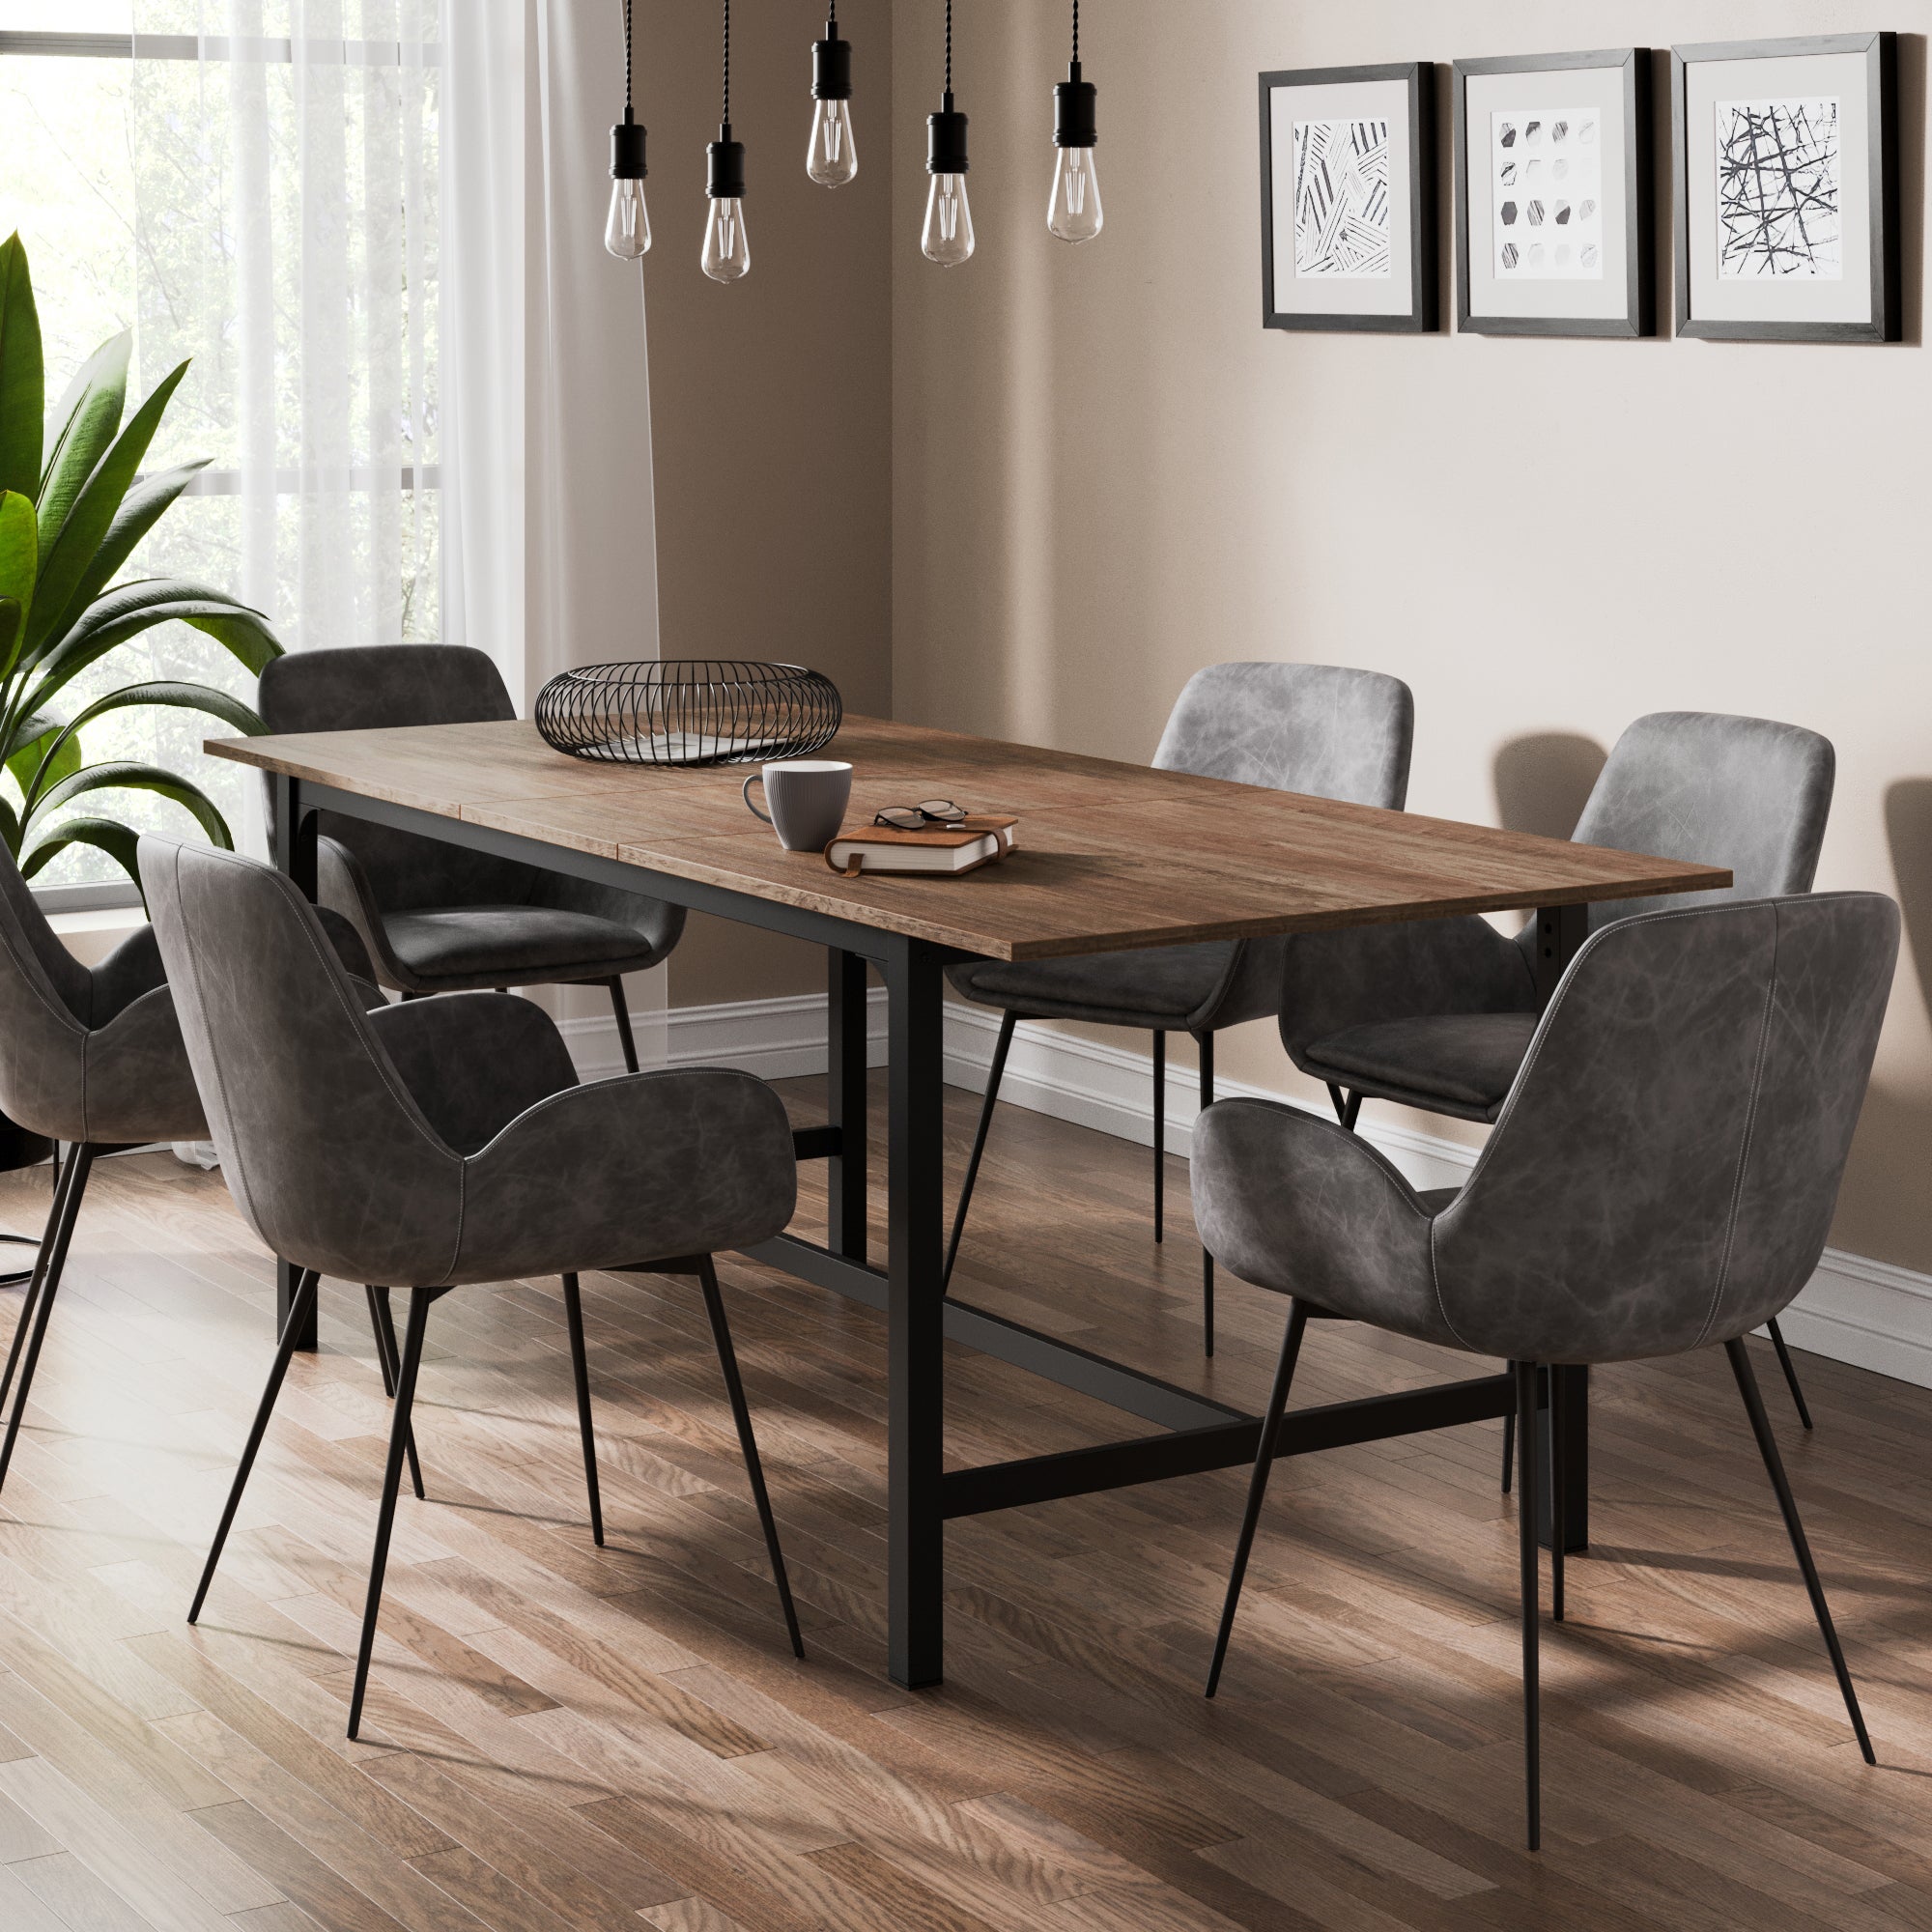 Fulton 6 Seater Rectangular Extendable Dining Table Brown